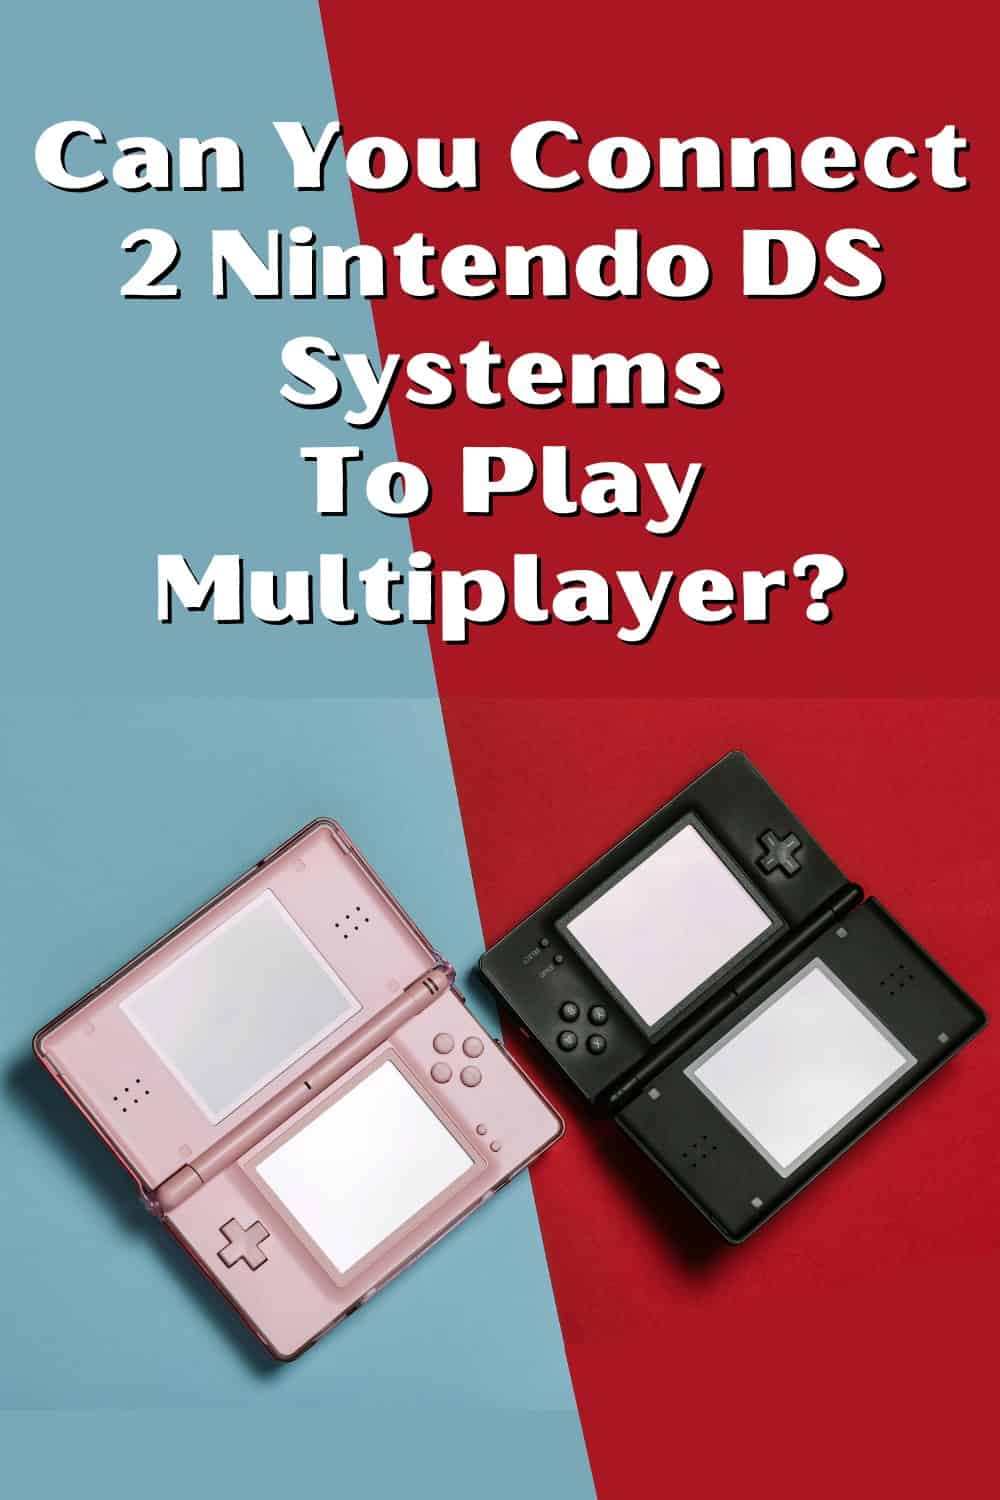 You can connect two Nintendo DS systems together and play the same game